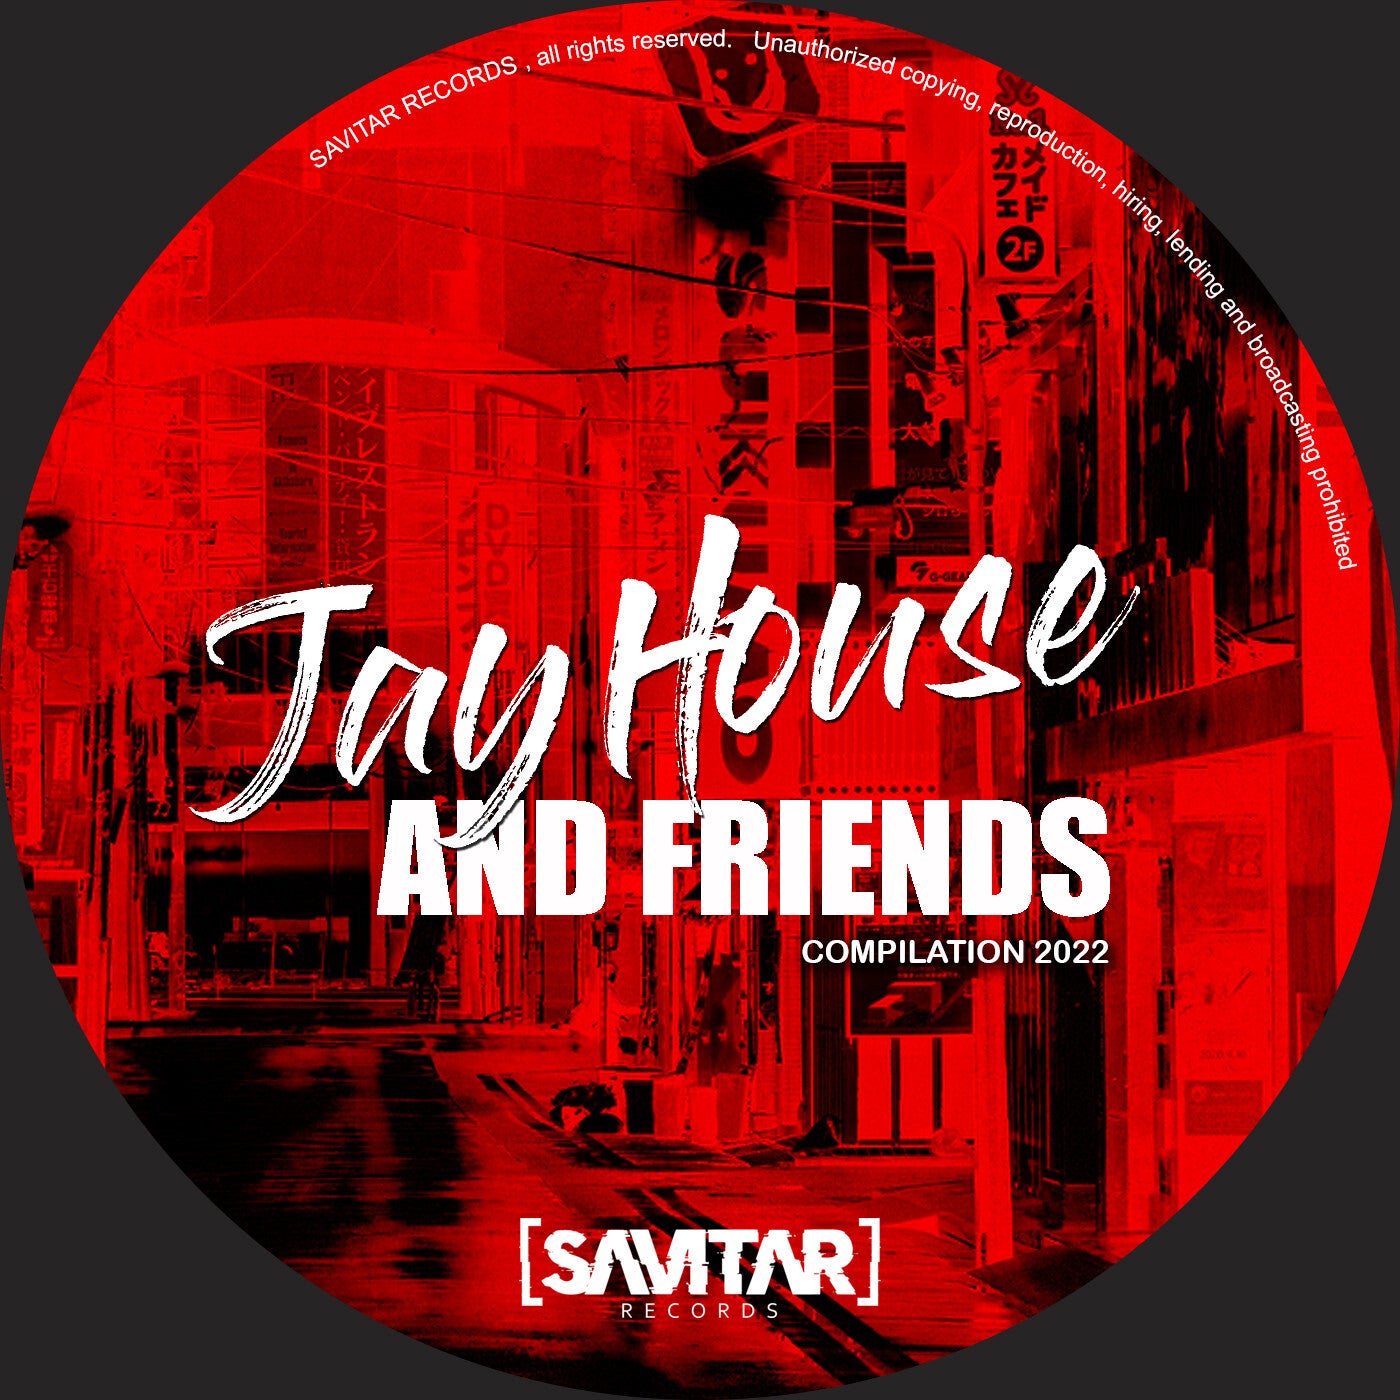 Jay House and Friends